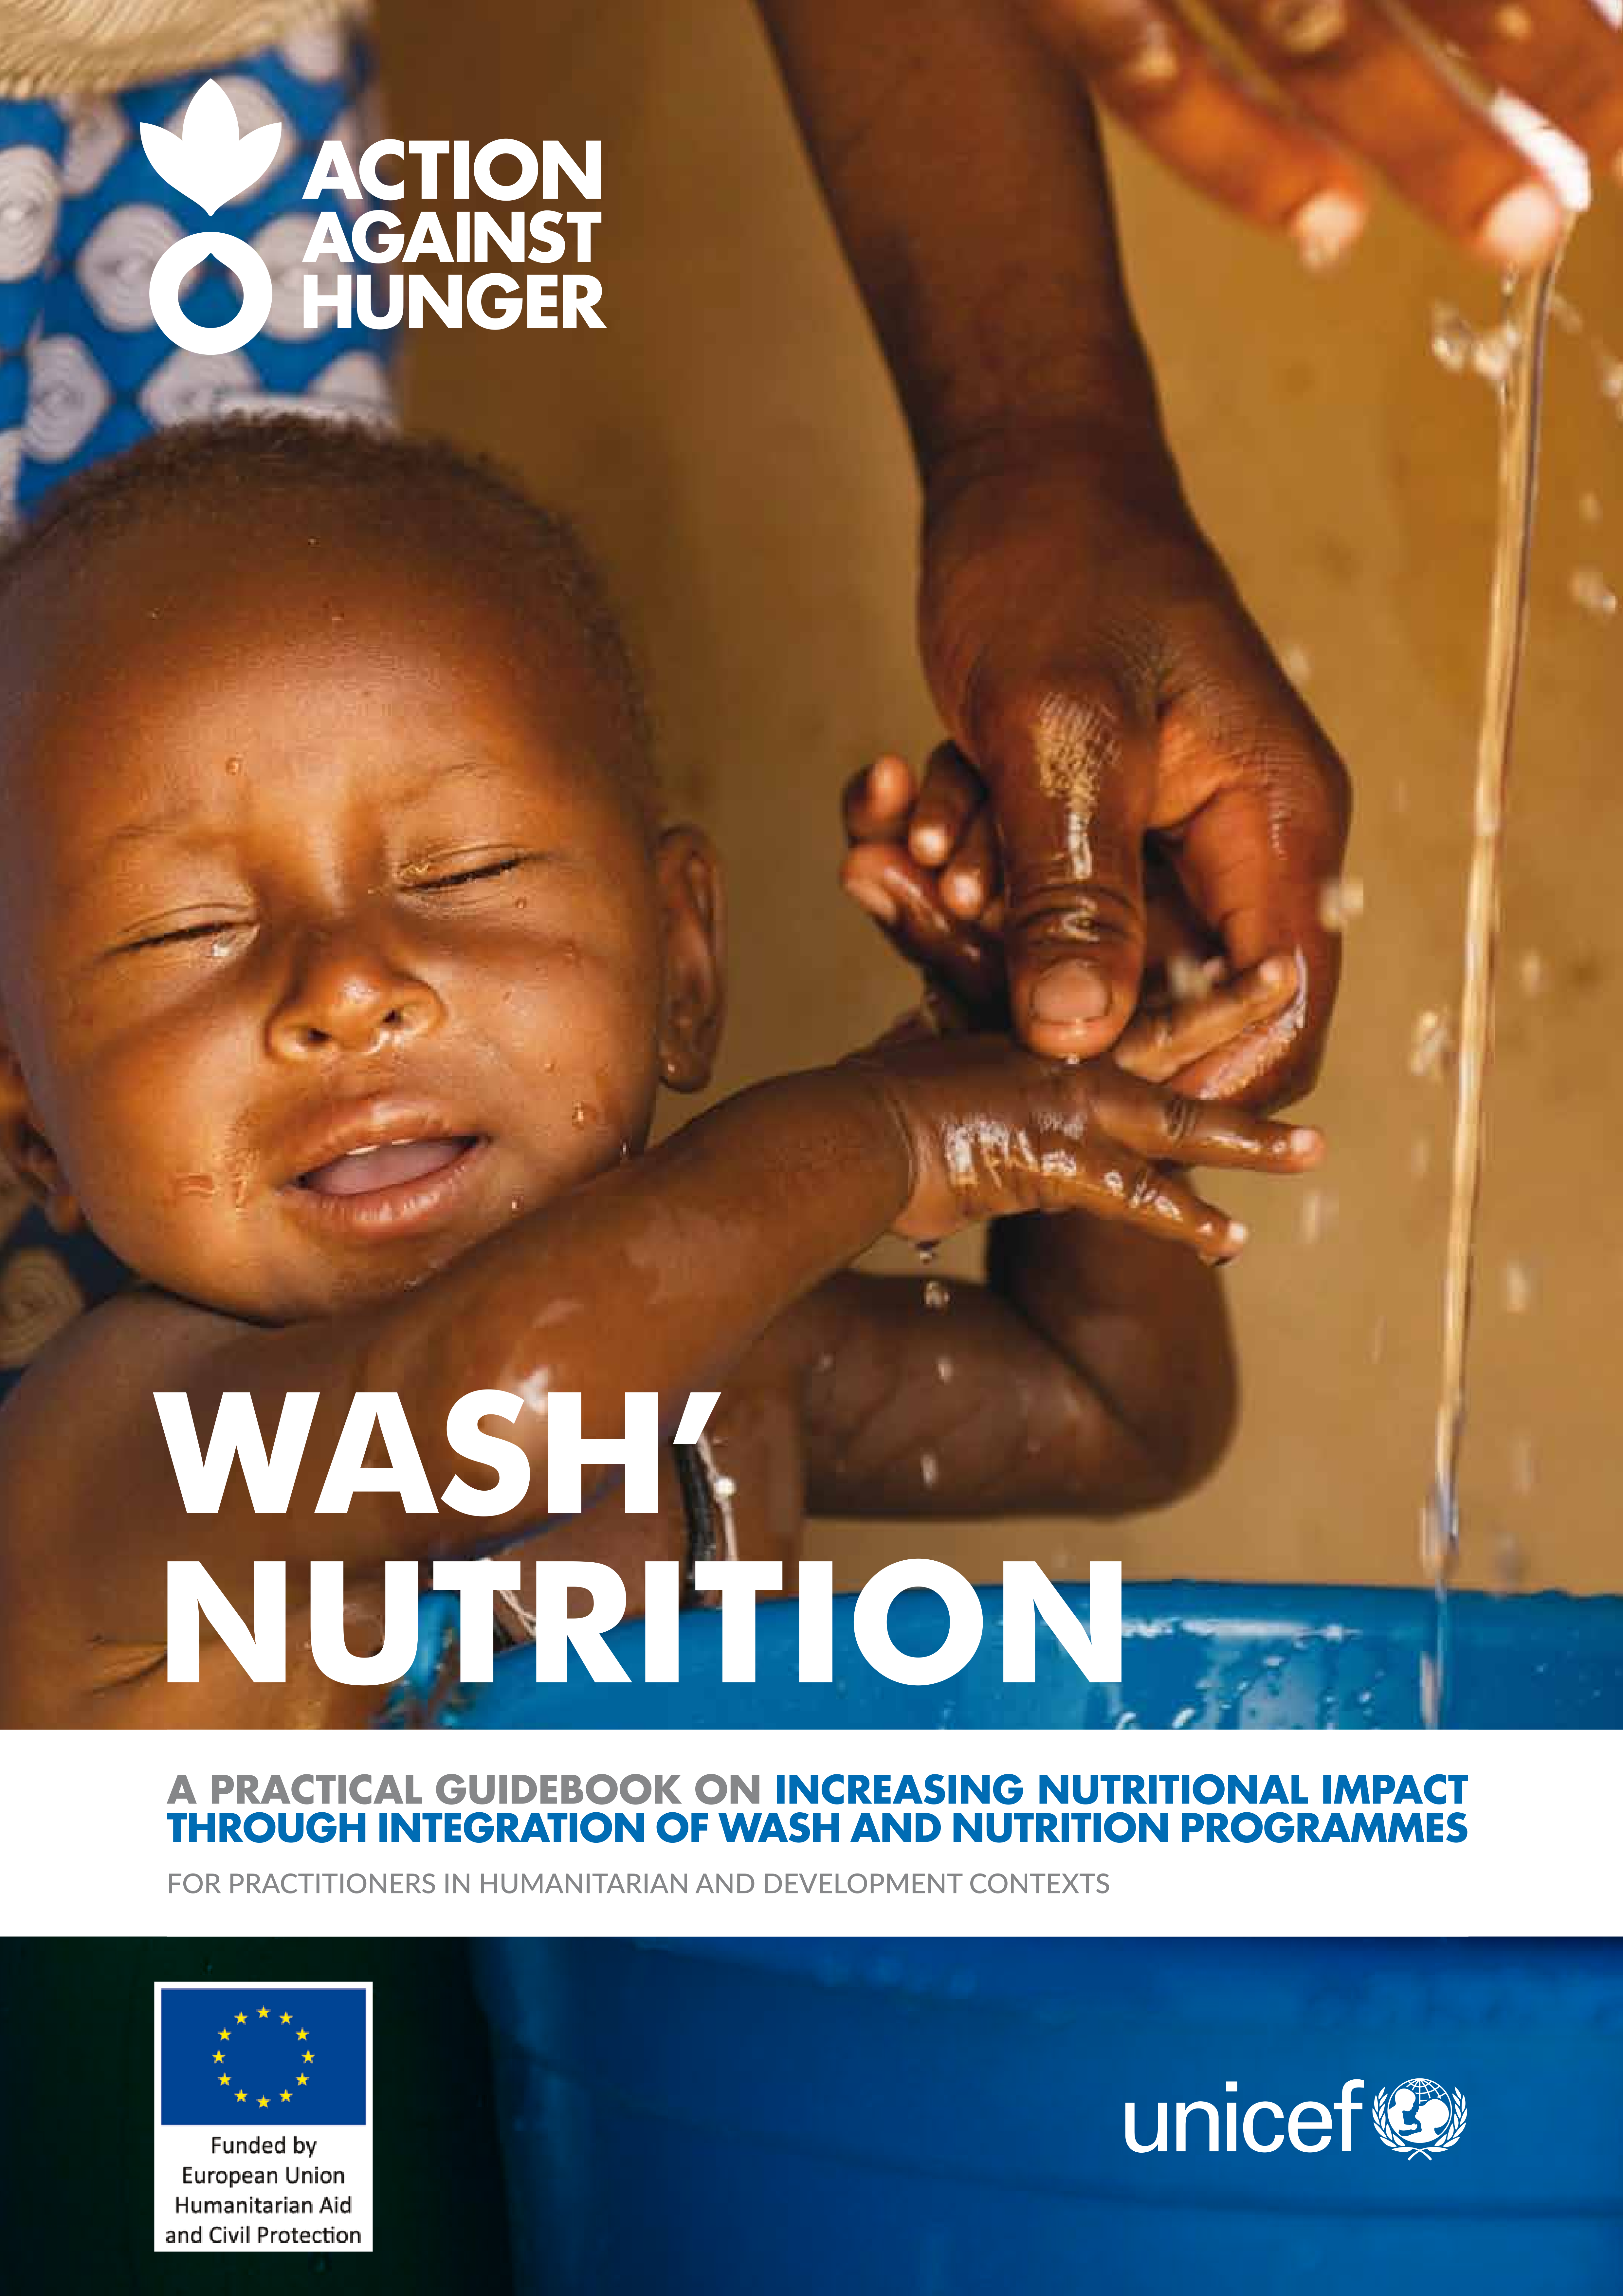 New guidebook supports integrated approaches to undernutrition with WASH activities